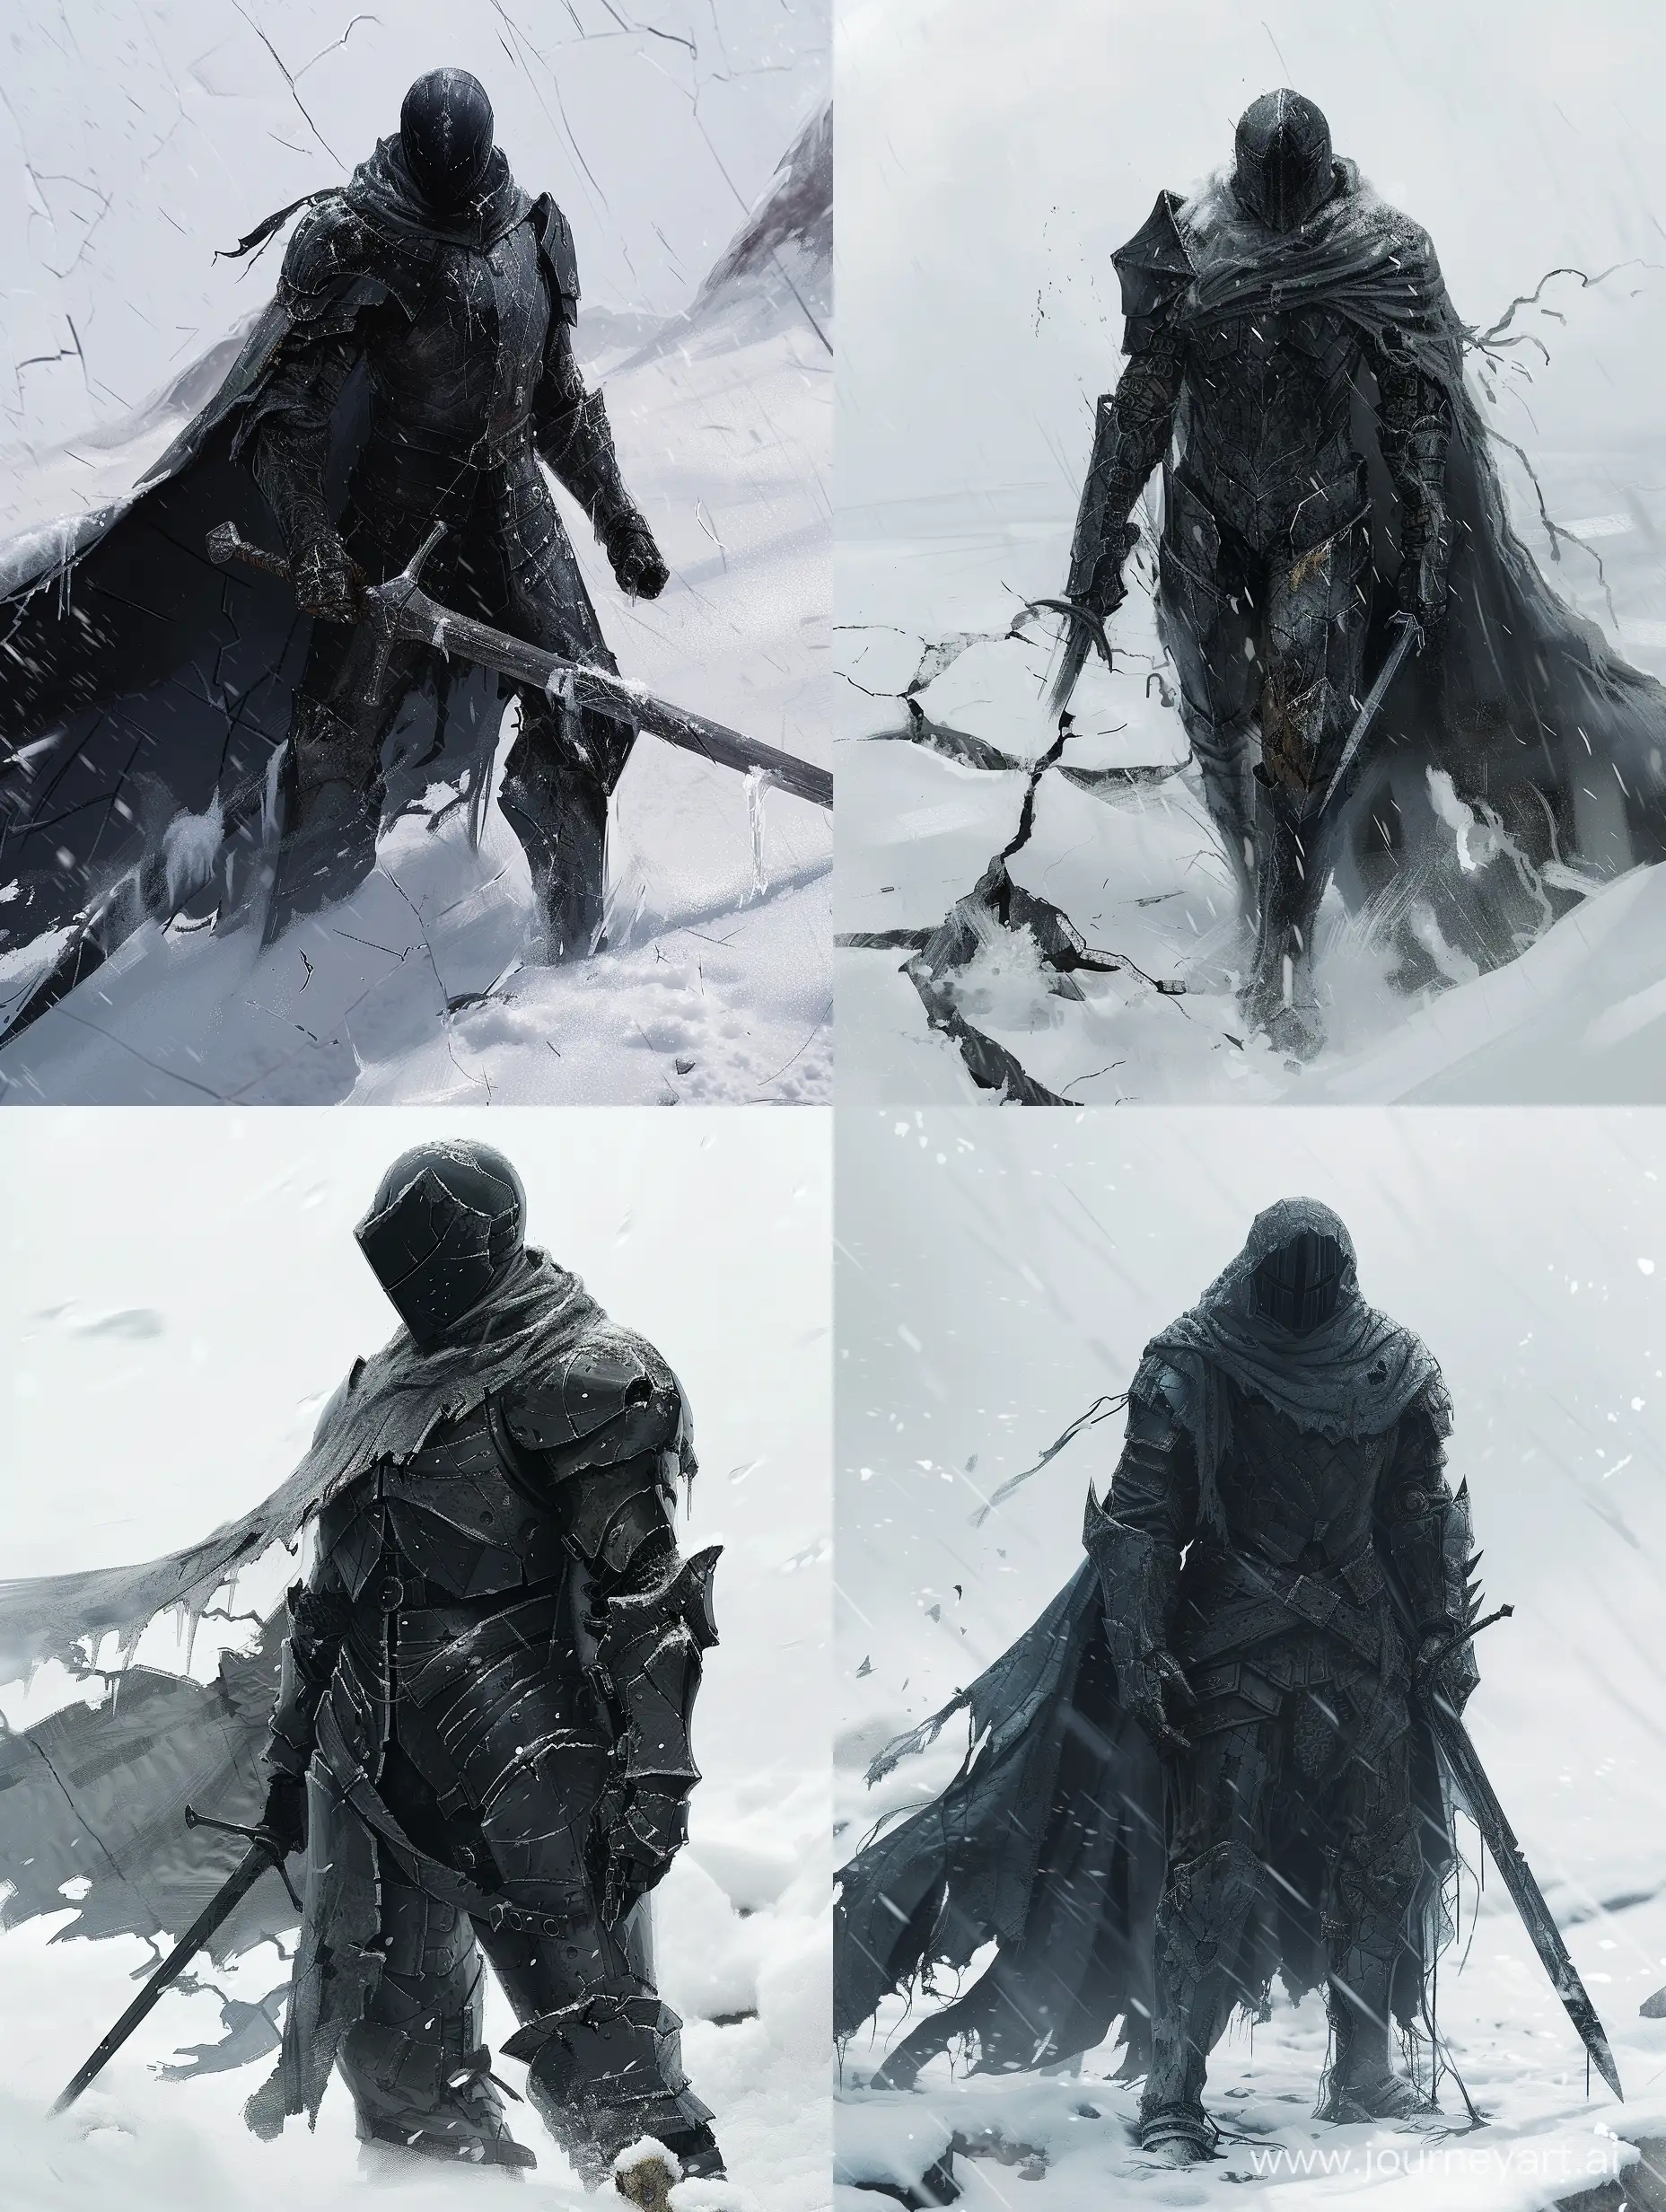 concept art, reference, clear art, black sci fi knight assassin, brutal pose. in the snow, cracked, darksouls style